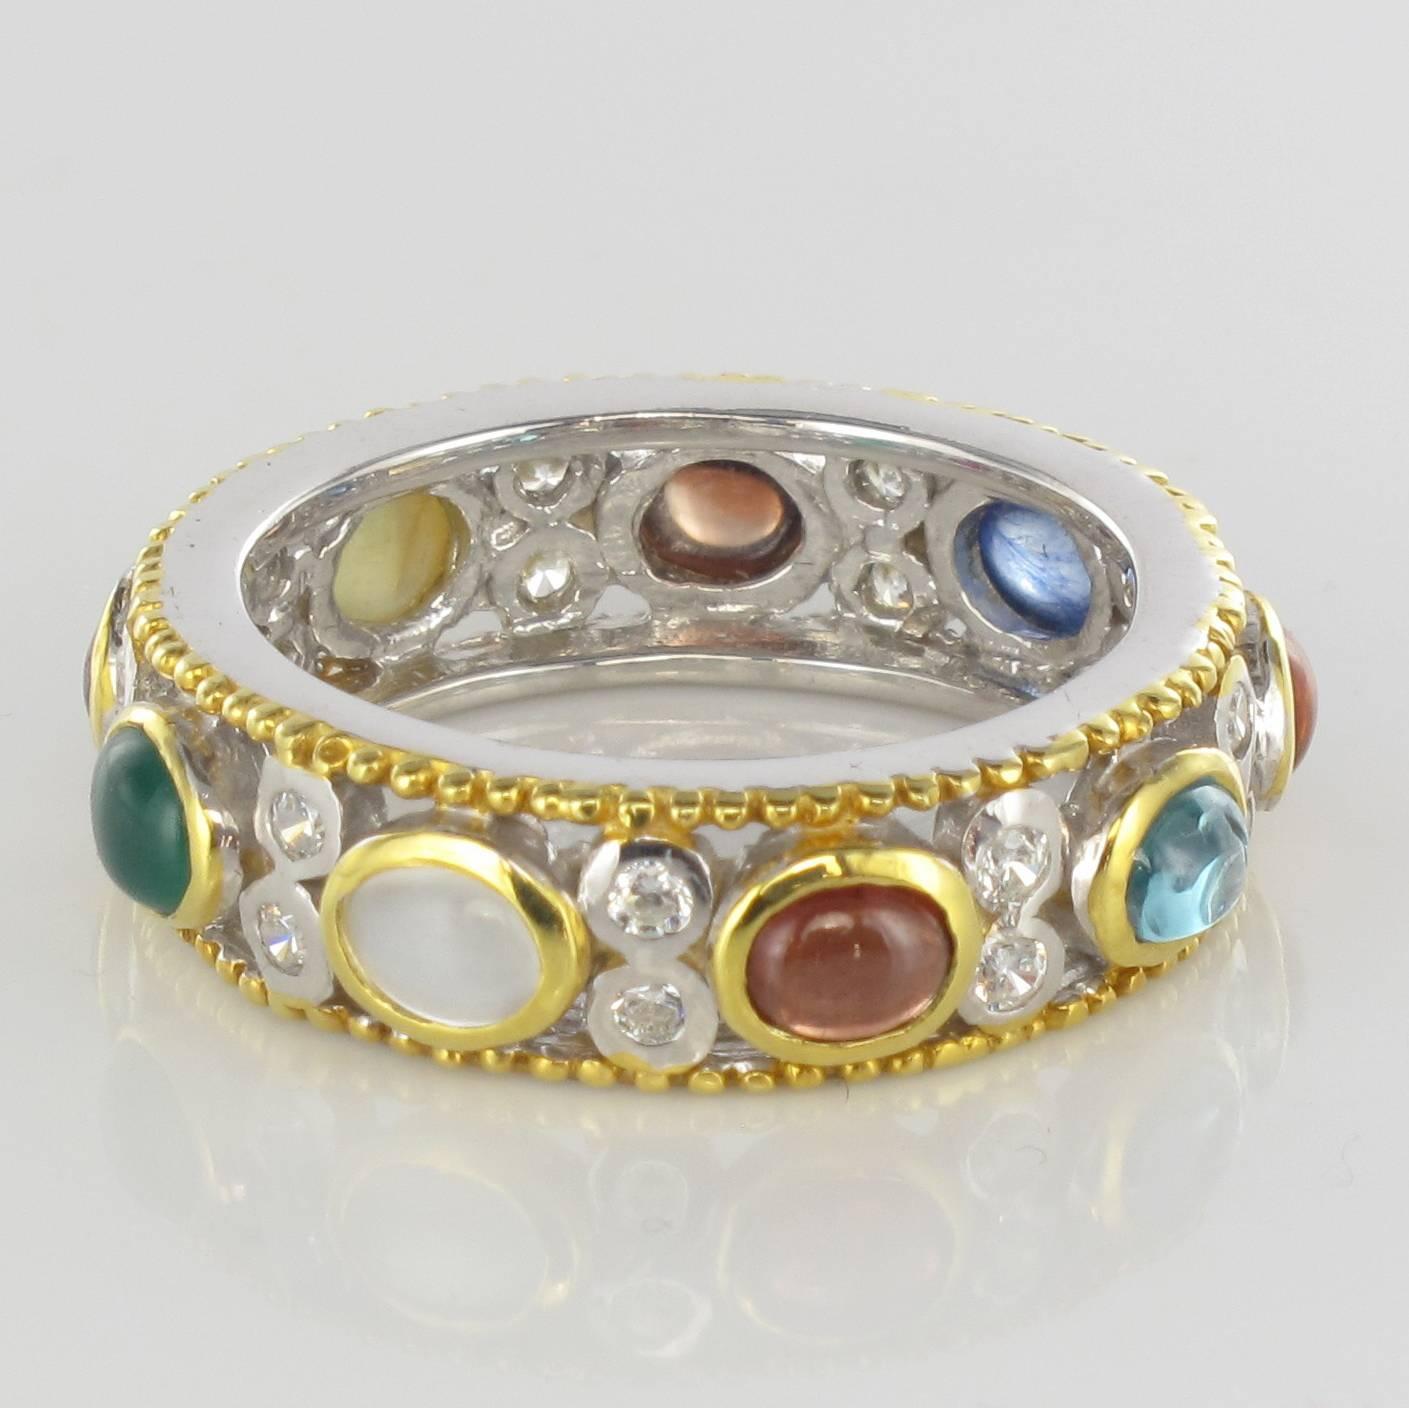 Modern New White Brown Zircon Sapphire Ruby Agate Silver Band Ring